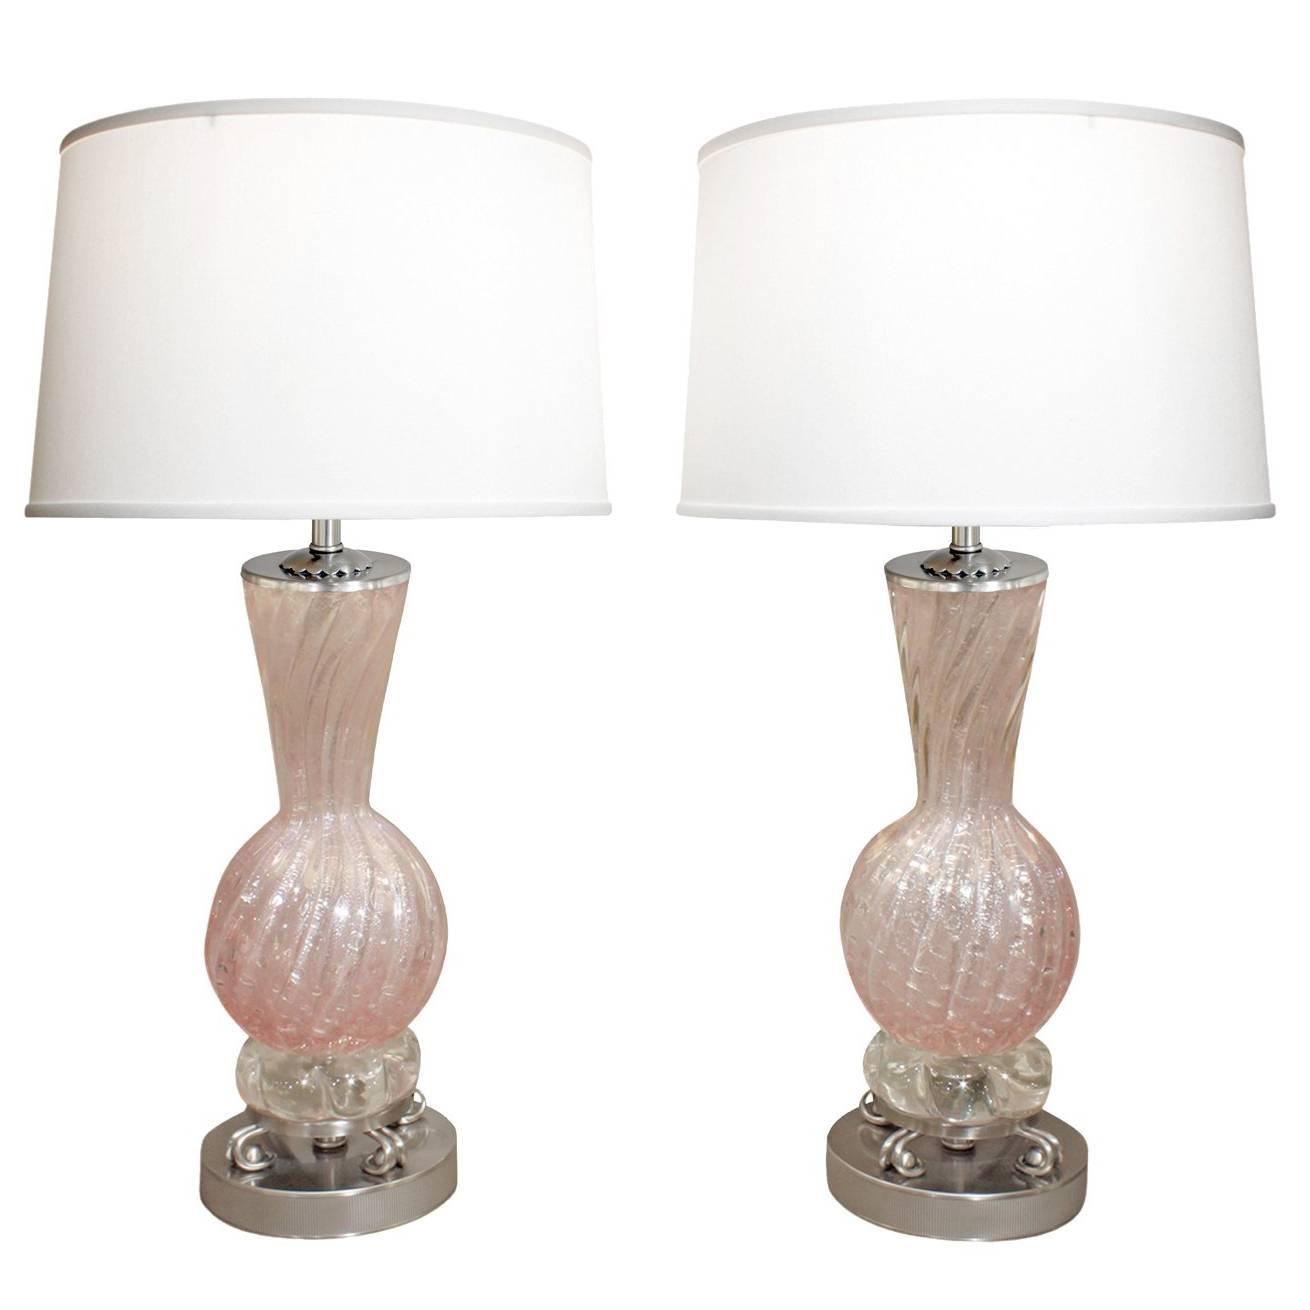 Barovier & Toso Pair of Hand-Blown Pink Glass Table Lamps, 1950s